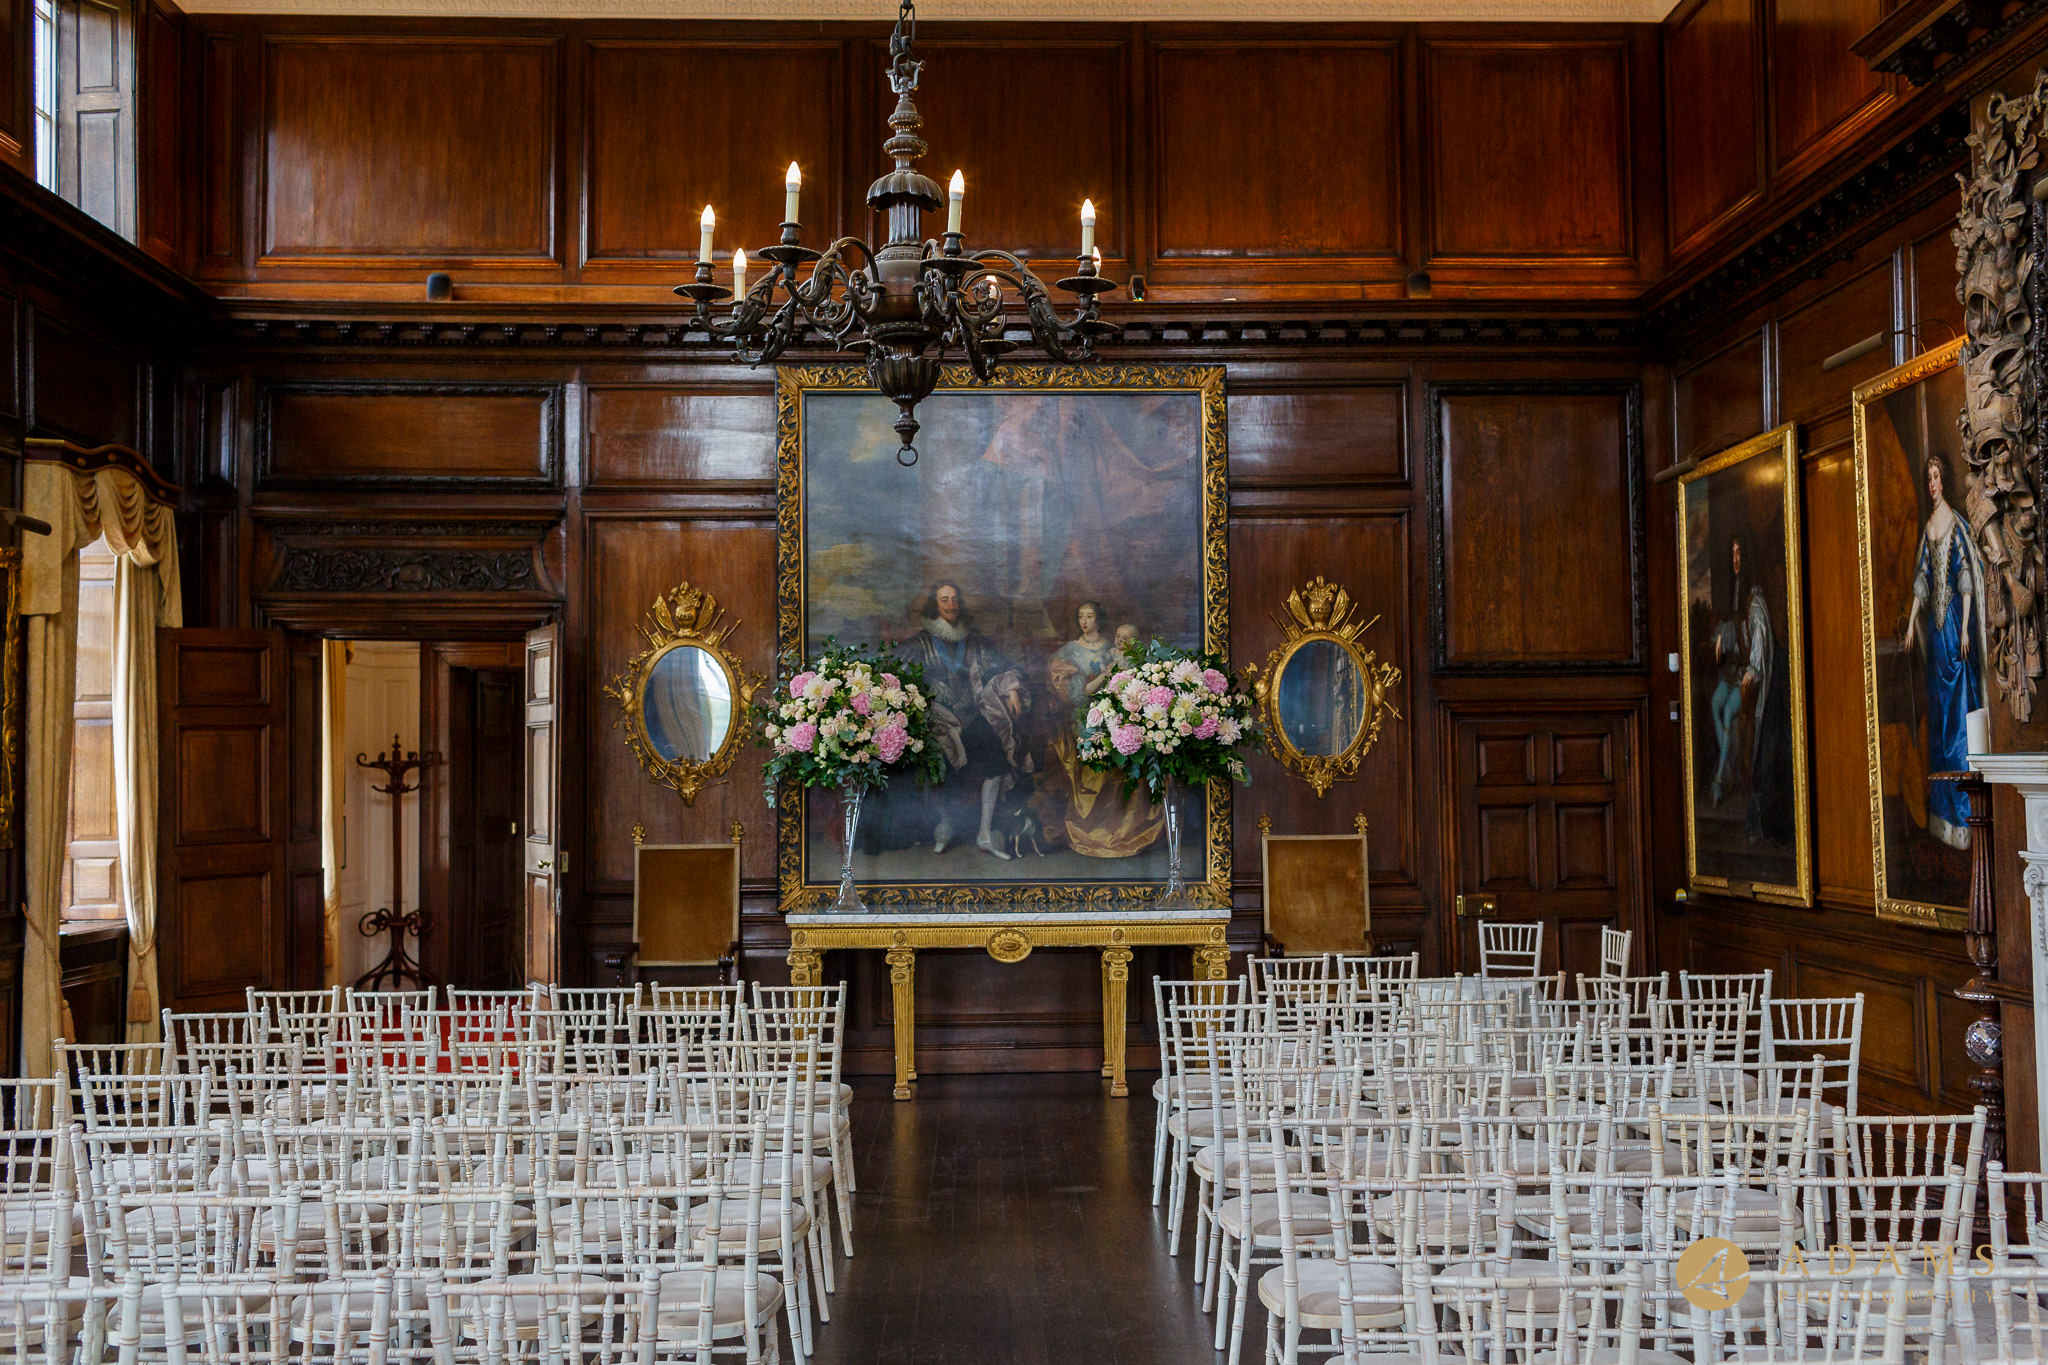 view of the wedding ceremony room at Royal Hospital Chelsea